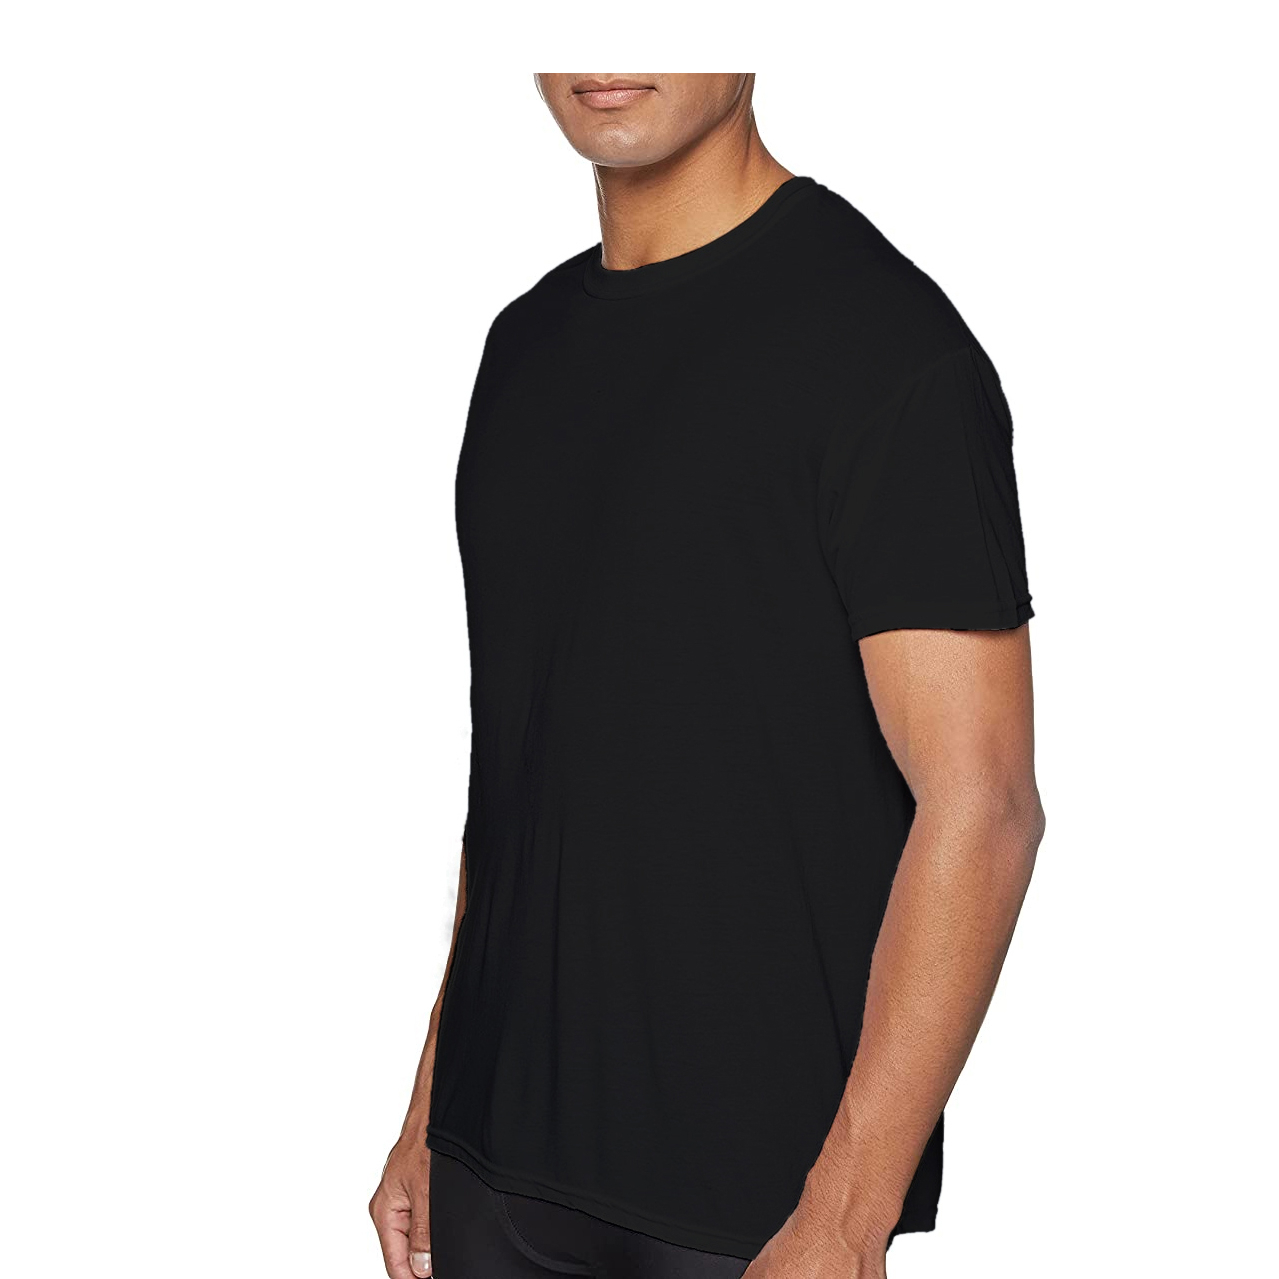 4-Pack: Men's Laviva Active Moisture Wicking Dry Fit Crew Neck Shirts - S